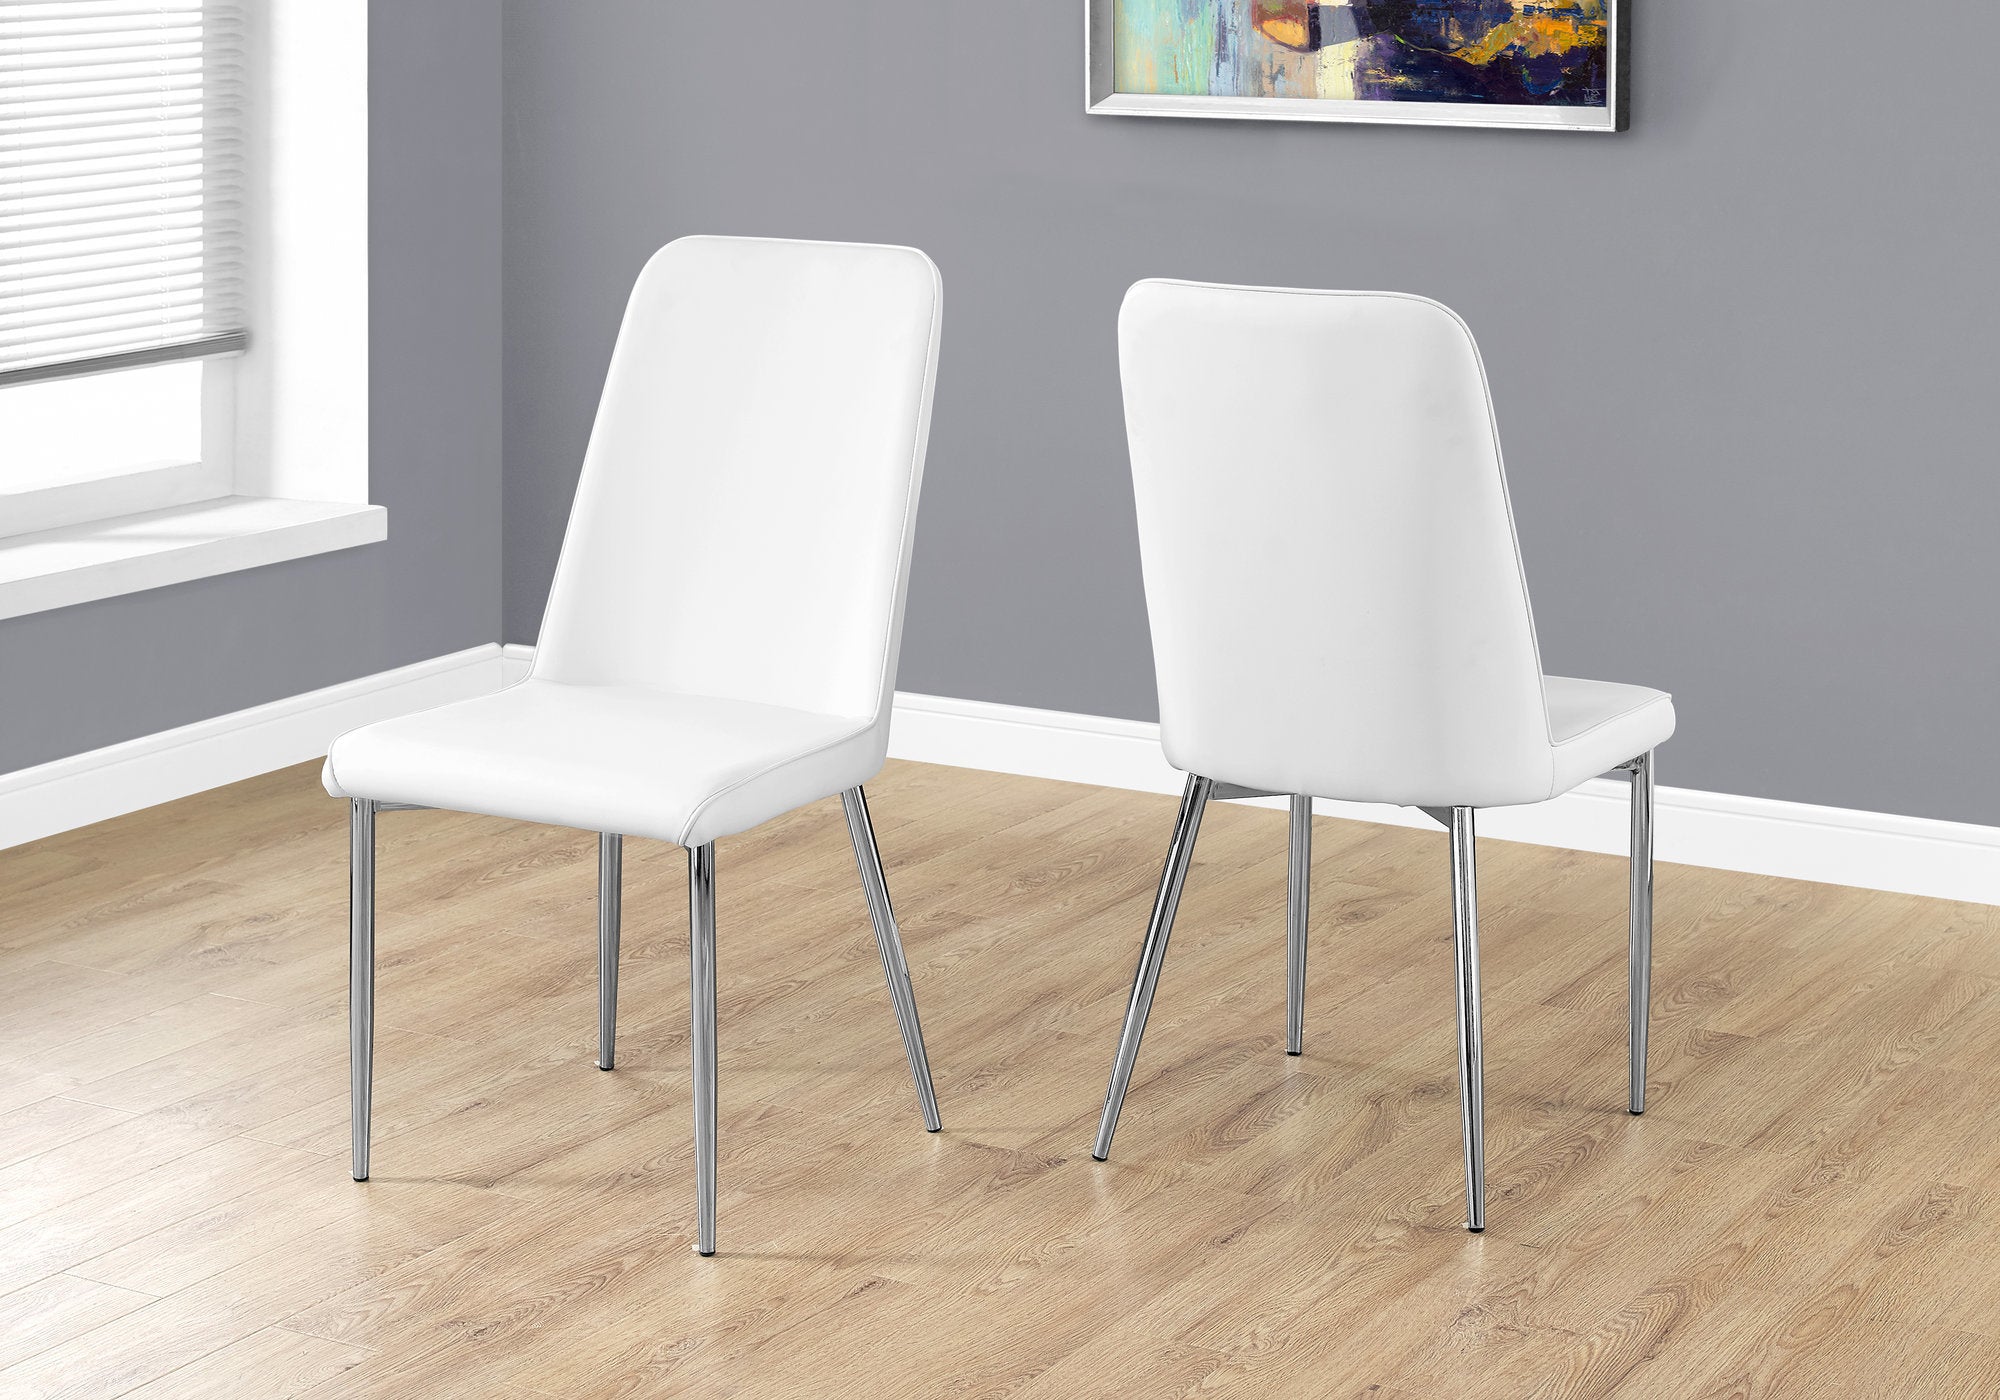 Hawk Modern Leather Look Dining Chair With Chrome Finished Legs (Set of 2 - White)